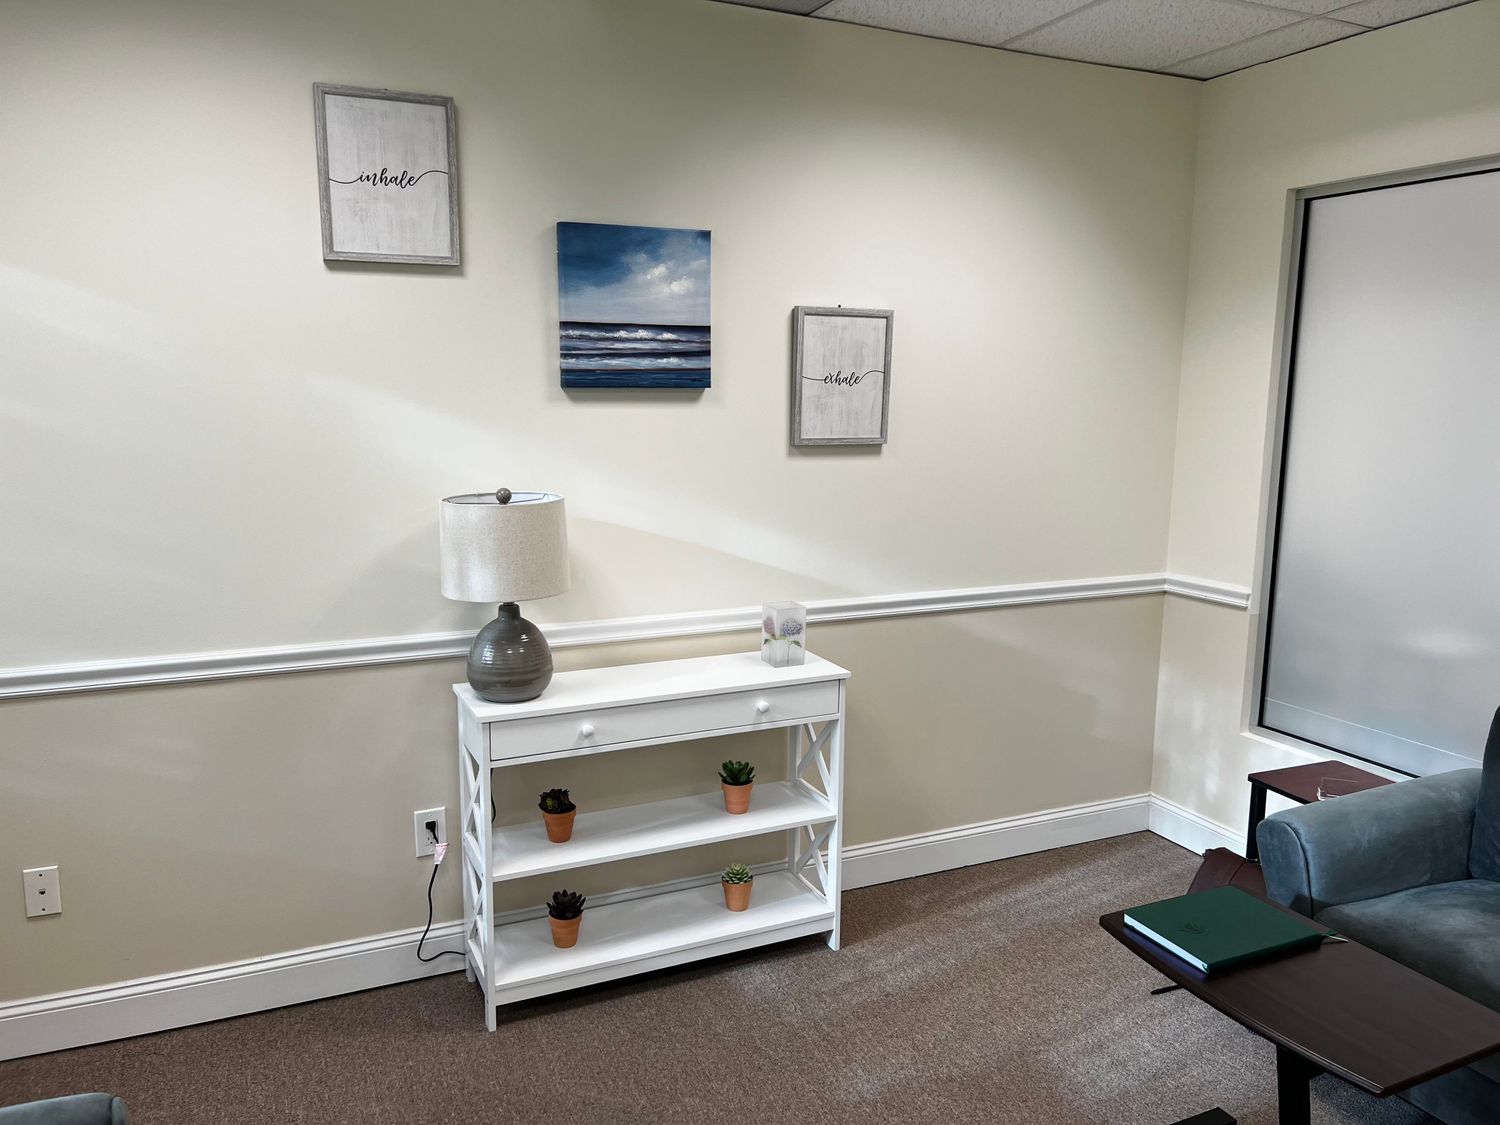 Gallery Photo of Therapy Room 